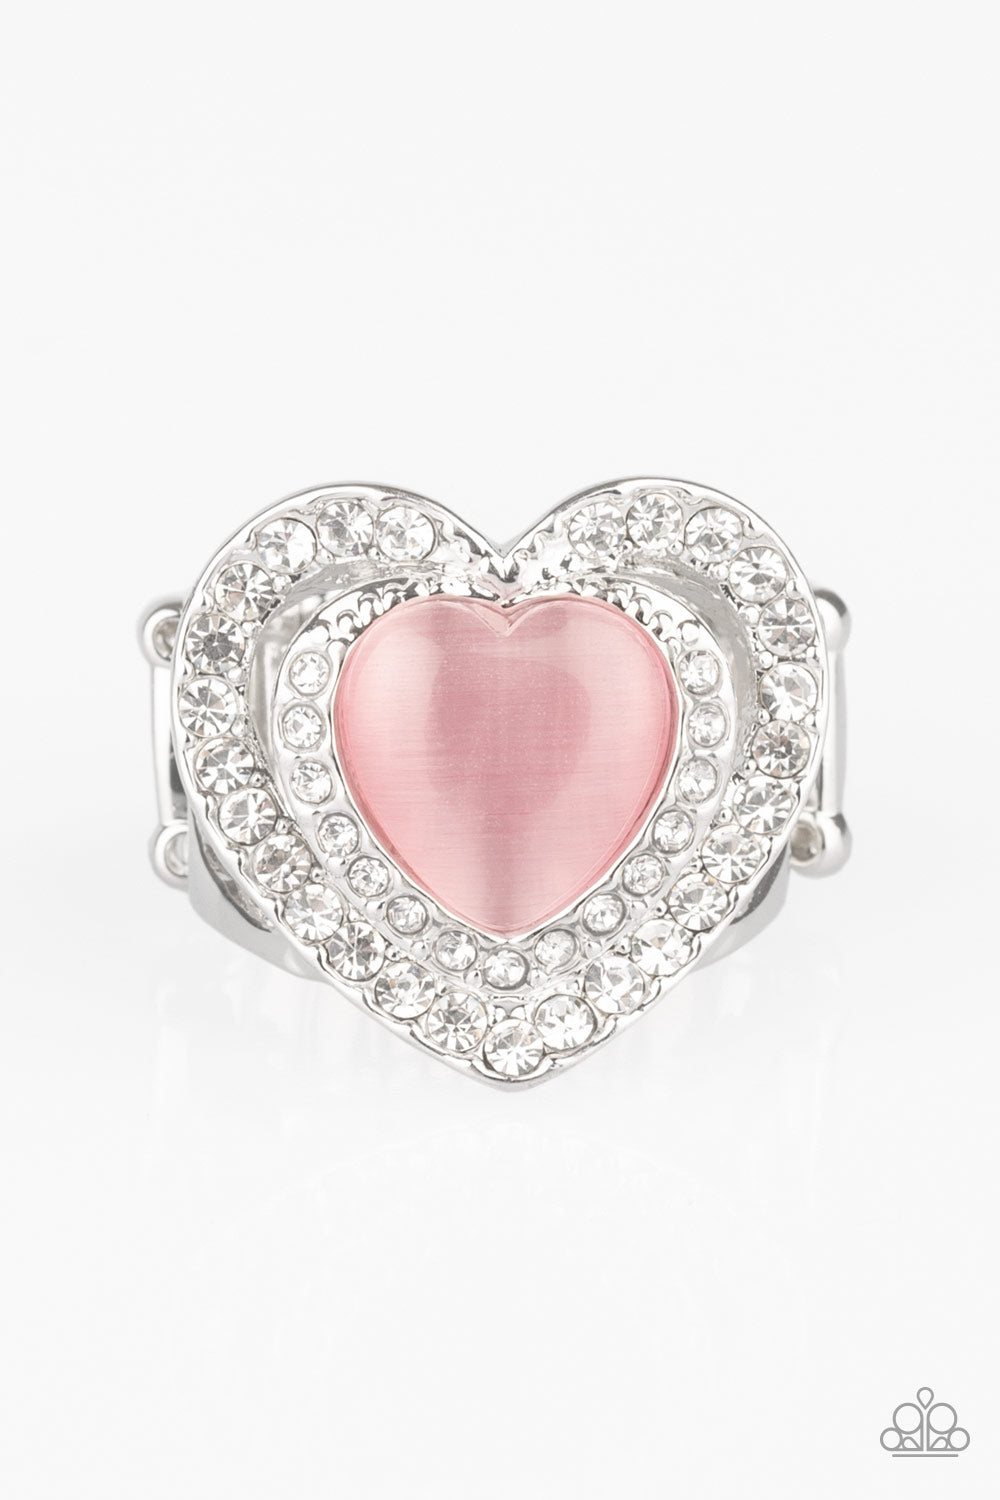 What The Heart Wants Pink Paparazzi Rings Cashmere Pink Jewels - Cashmere Pink Jewels & Accessories, Cashmere Pink Jewels & Accessories - Paparazzi